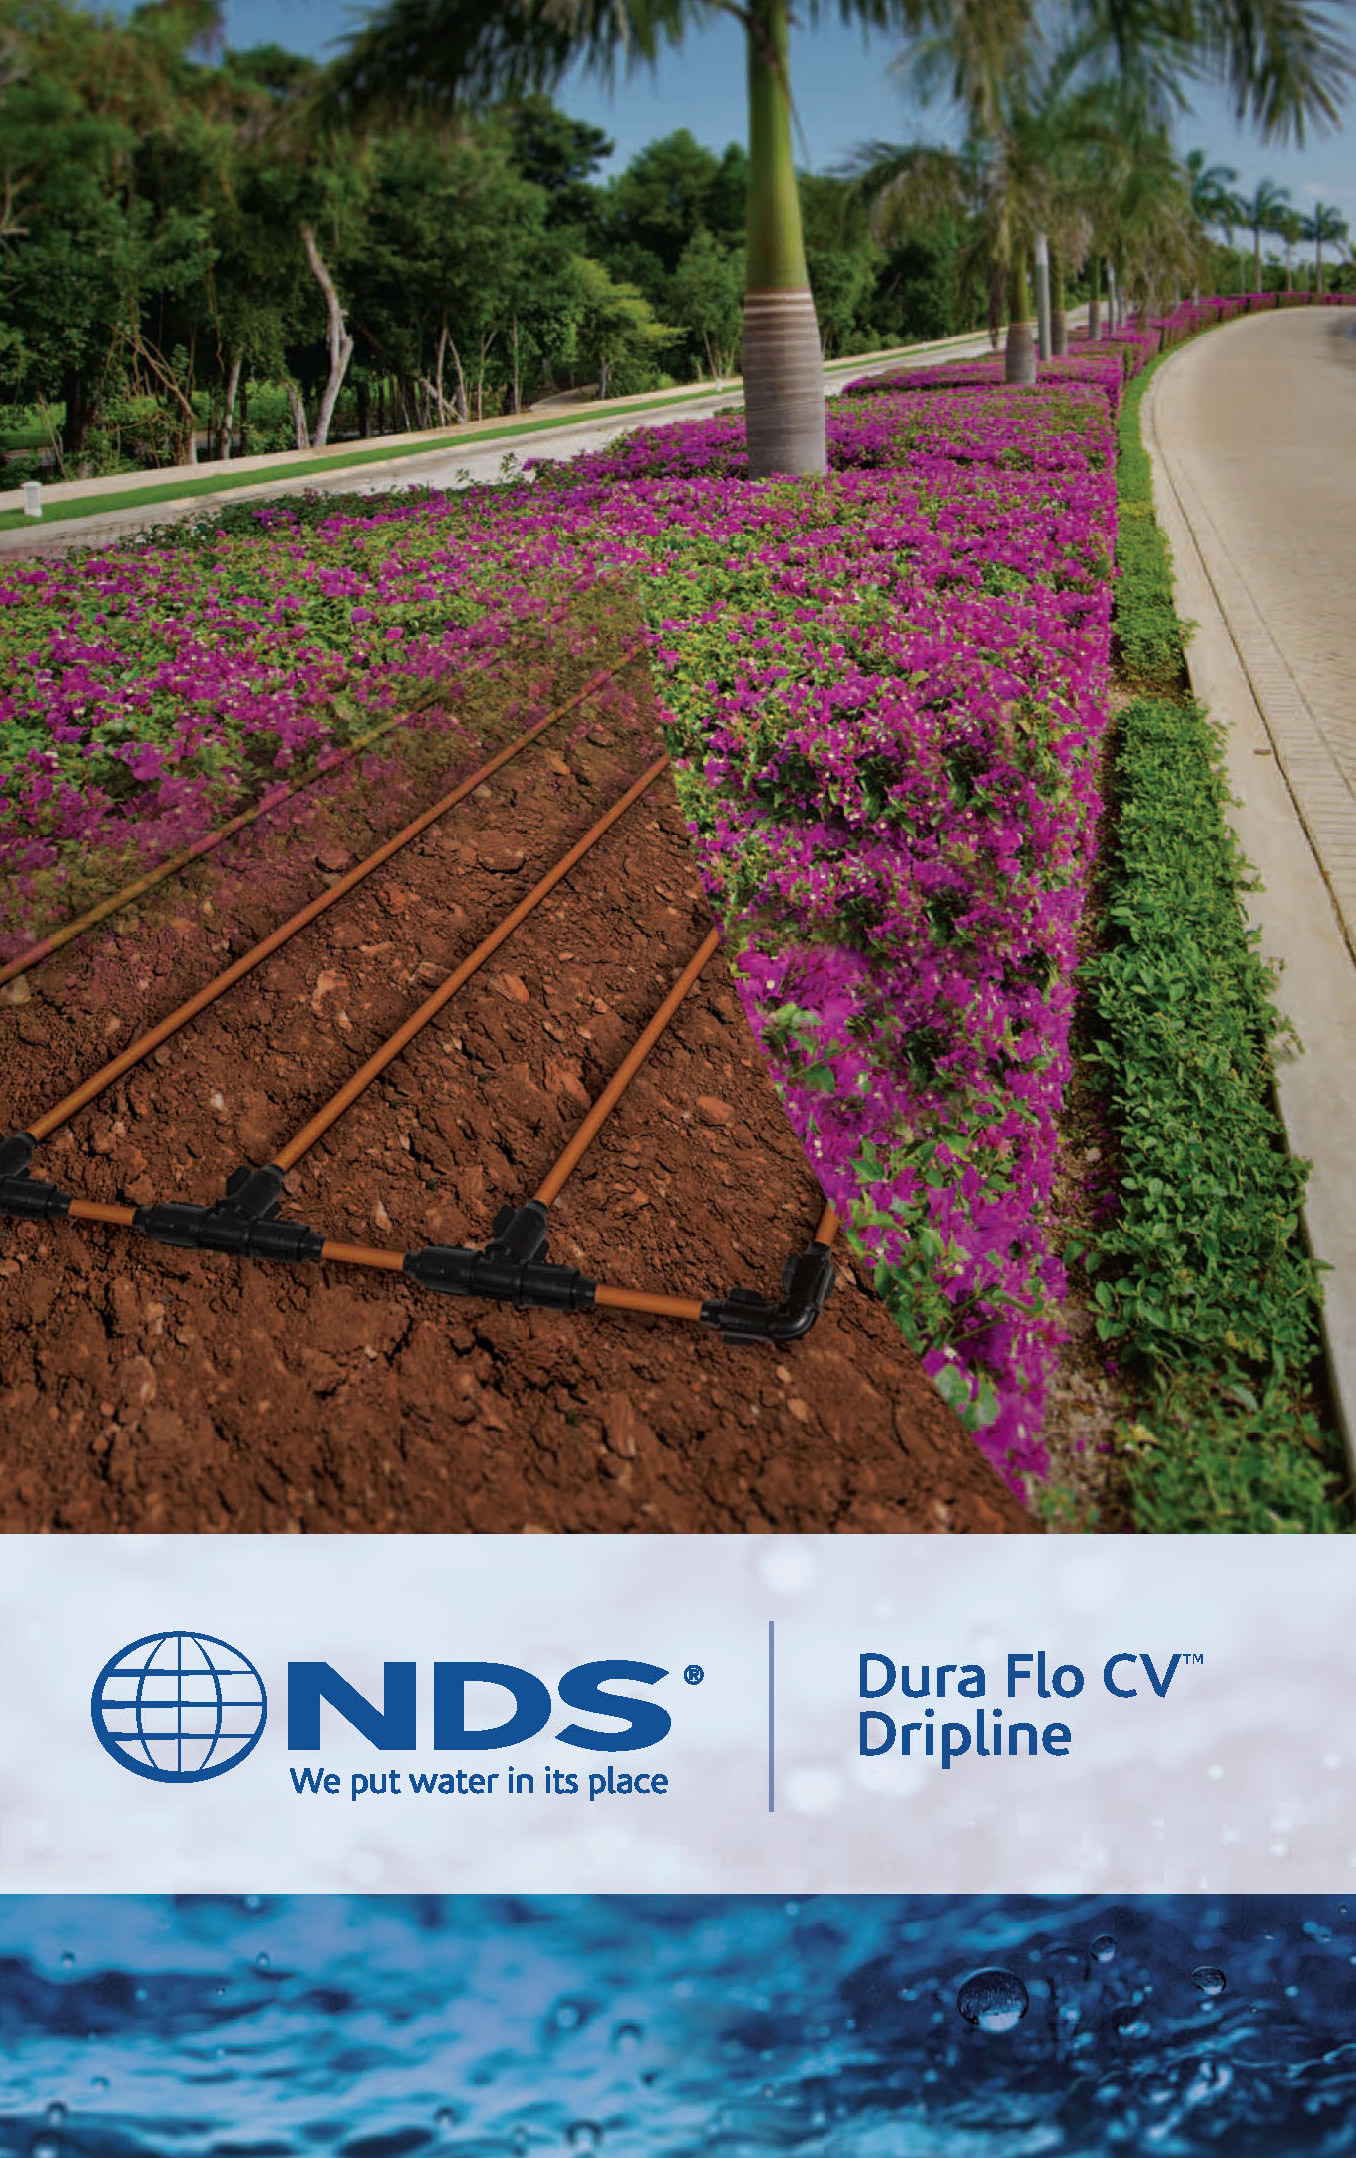 NDS Dura Flo CV Dripline is an all-in-one solution for drip irrigation, providing landscape professionals with a higher level of water conservation for irrigation projects, all with no root intrusion.